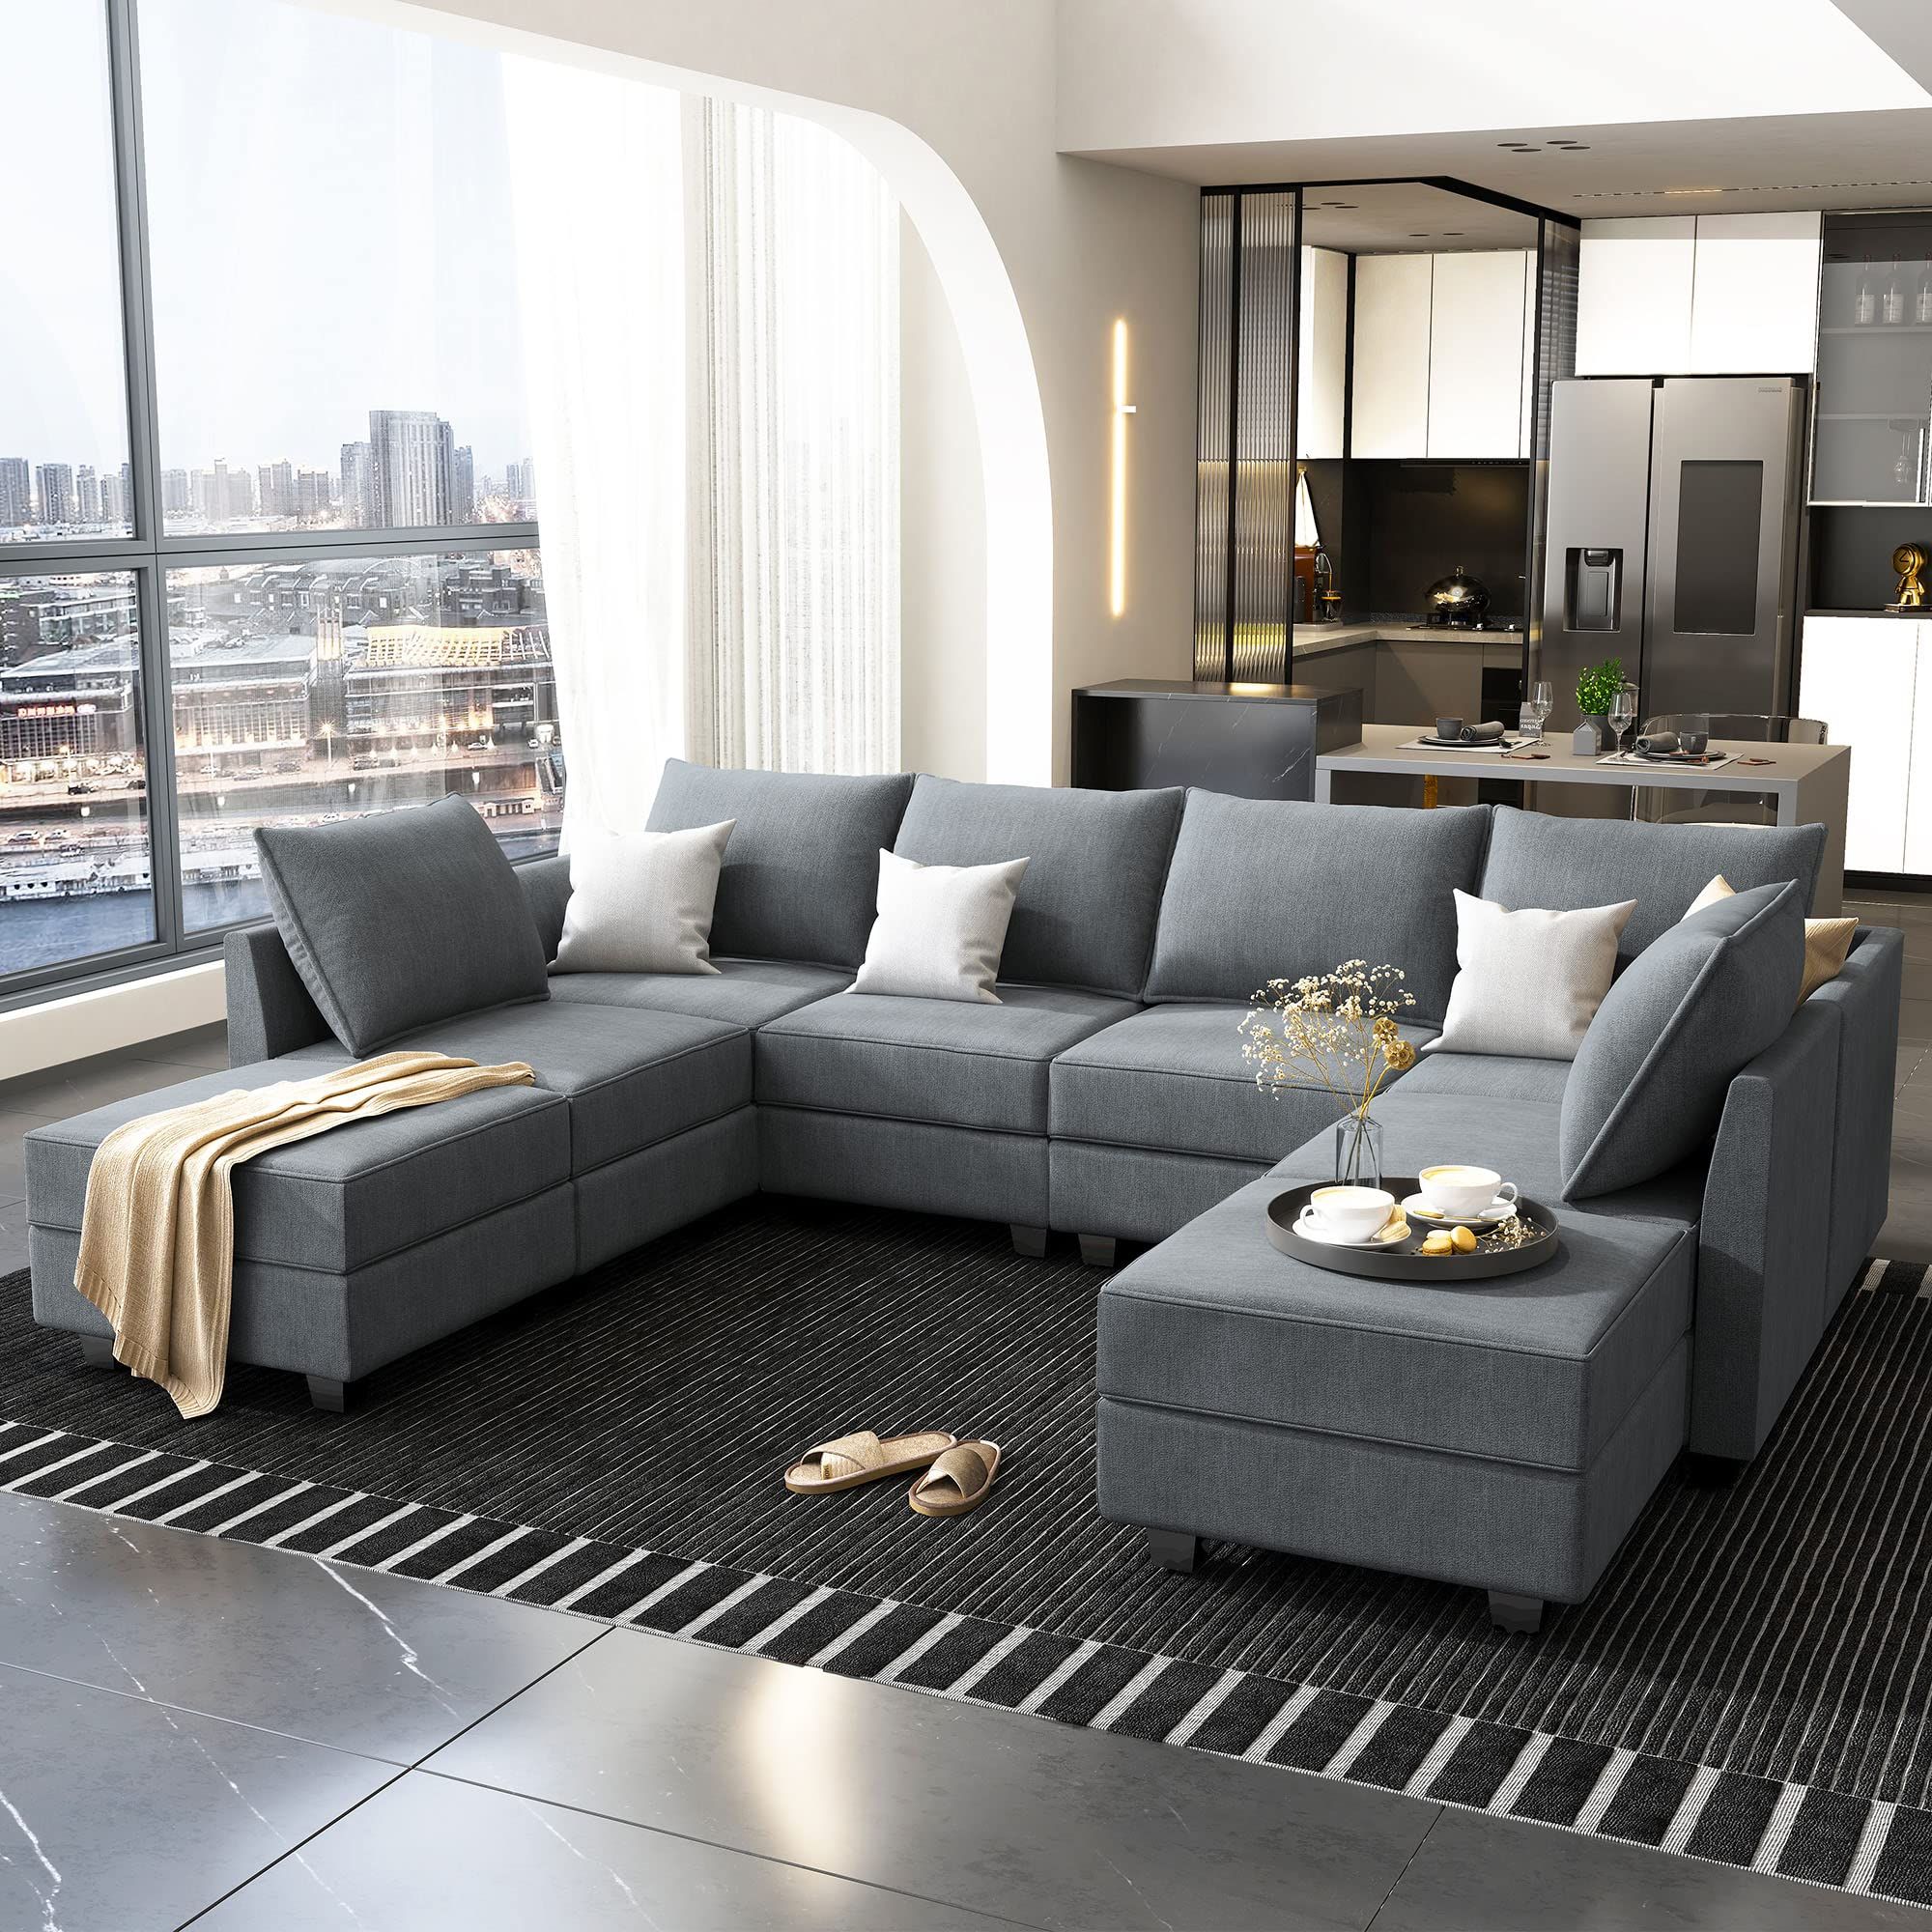 Famous Honbay Modular Sectional Sofa U Shaped Sectional Couch With Ottomans Inside Modern U Shape Sectional Sofas In Gray (View 6 of 15)